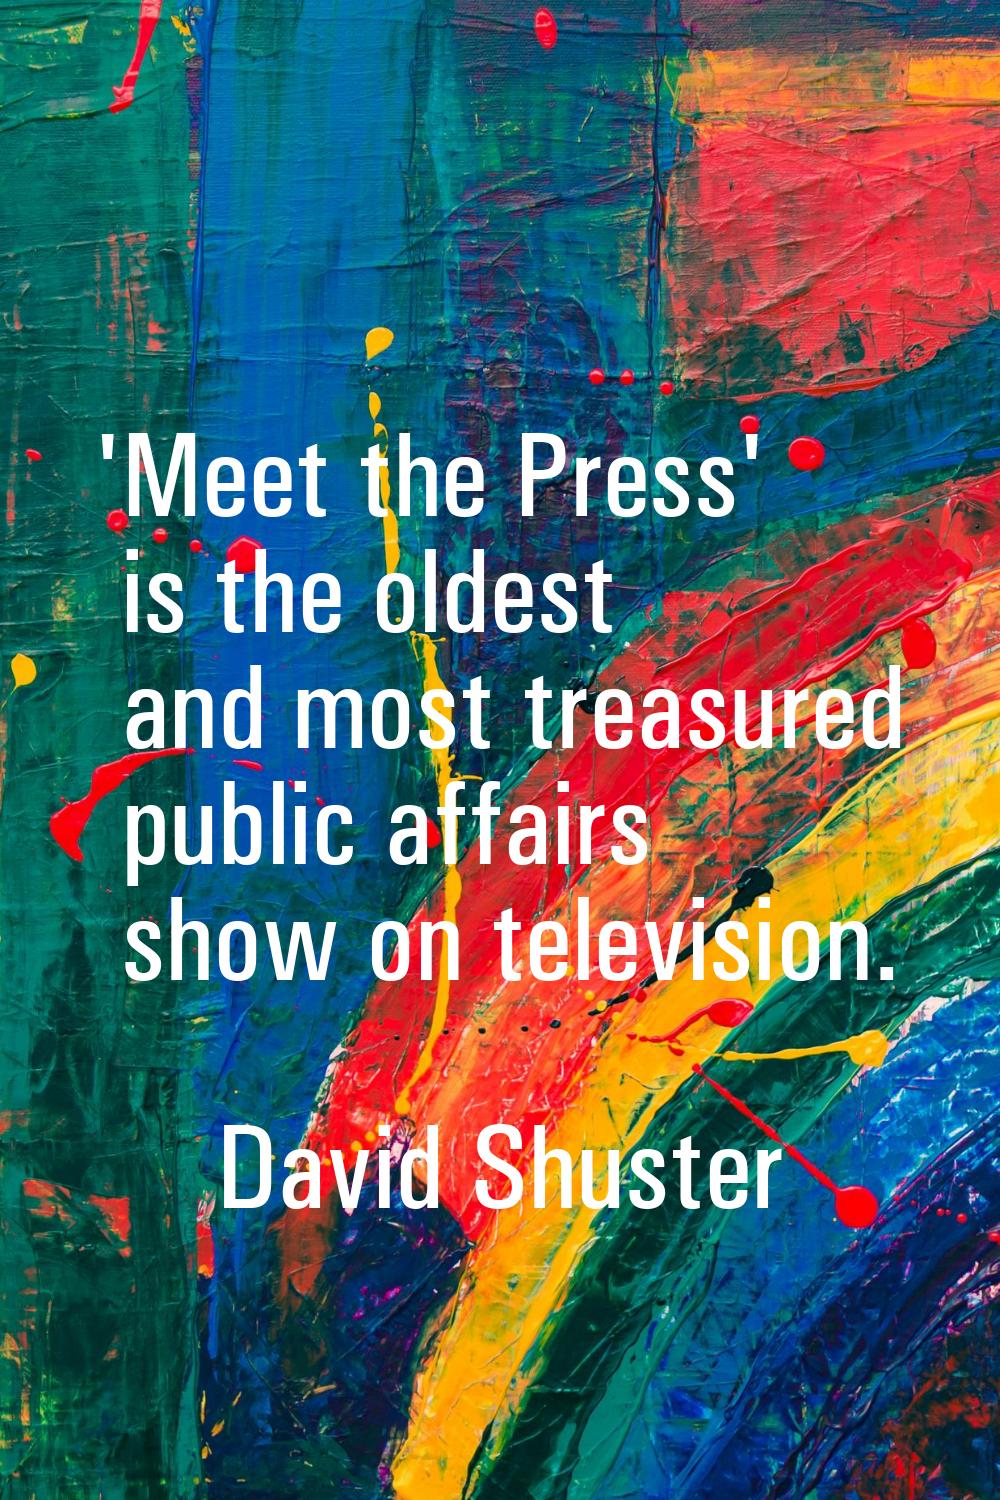 'Meet the Press' is the oldest and most treasured public affairs show on television.